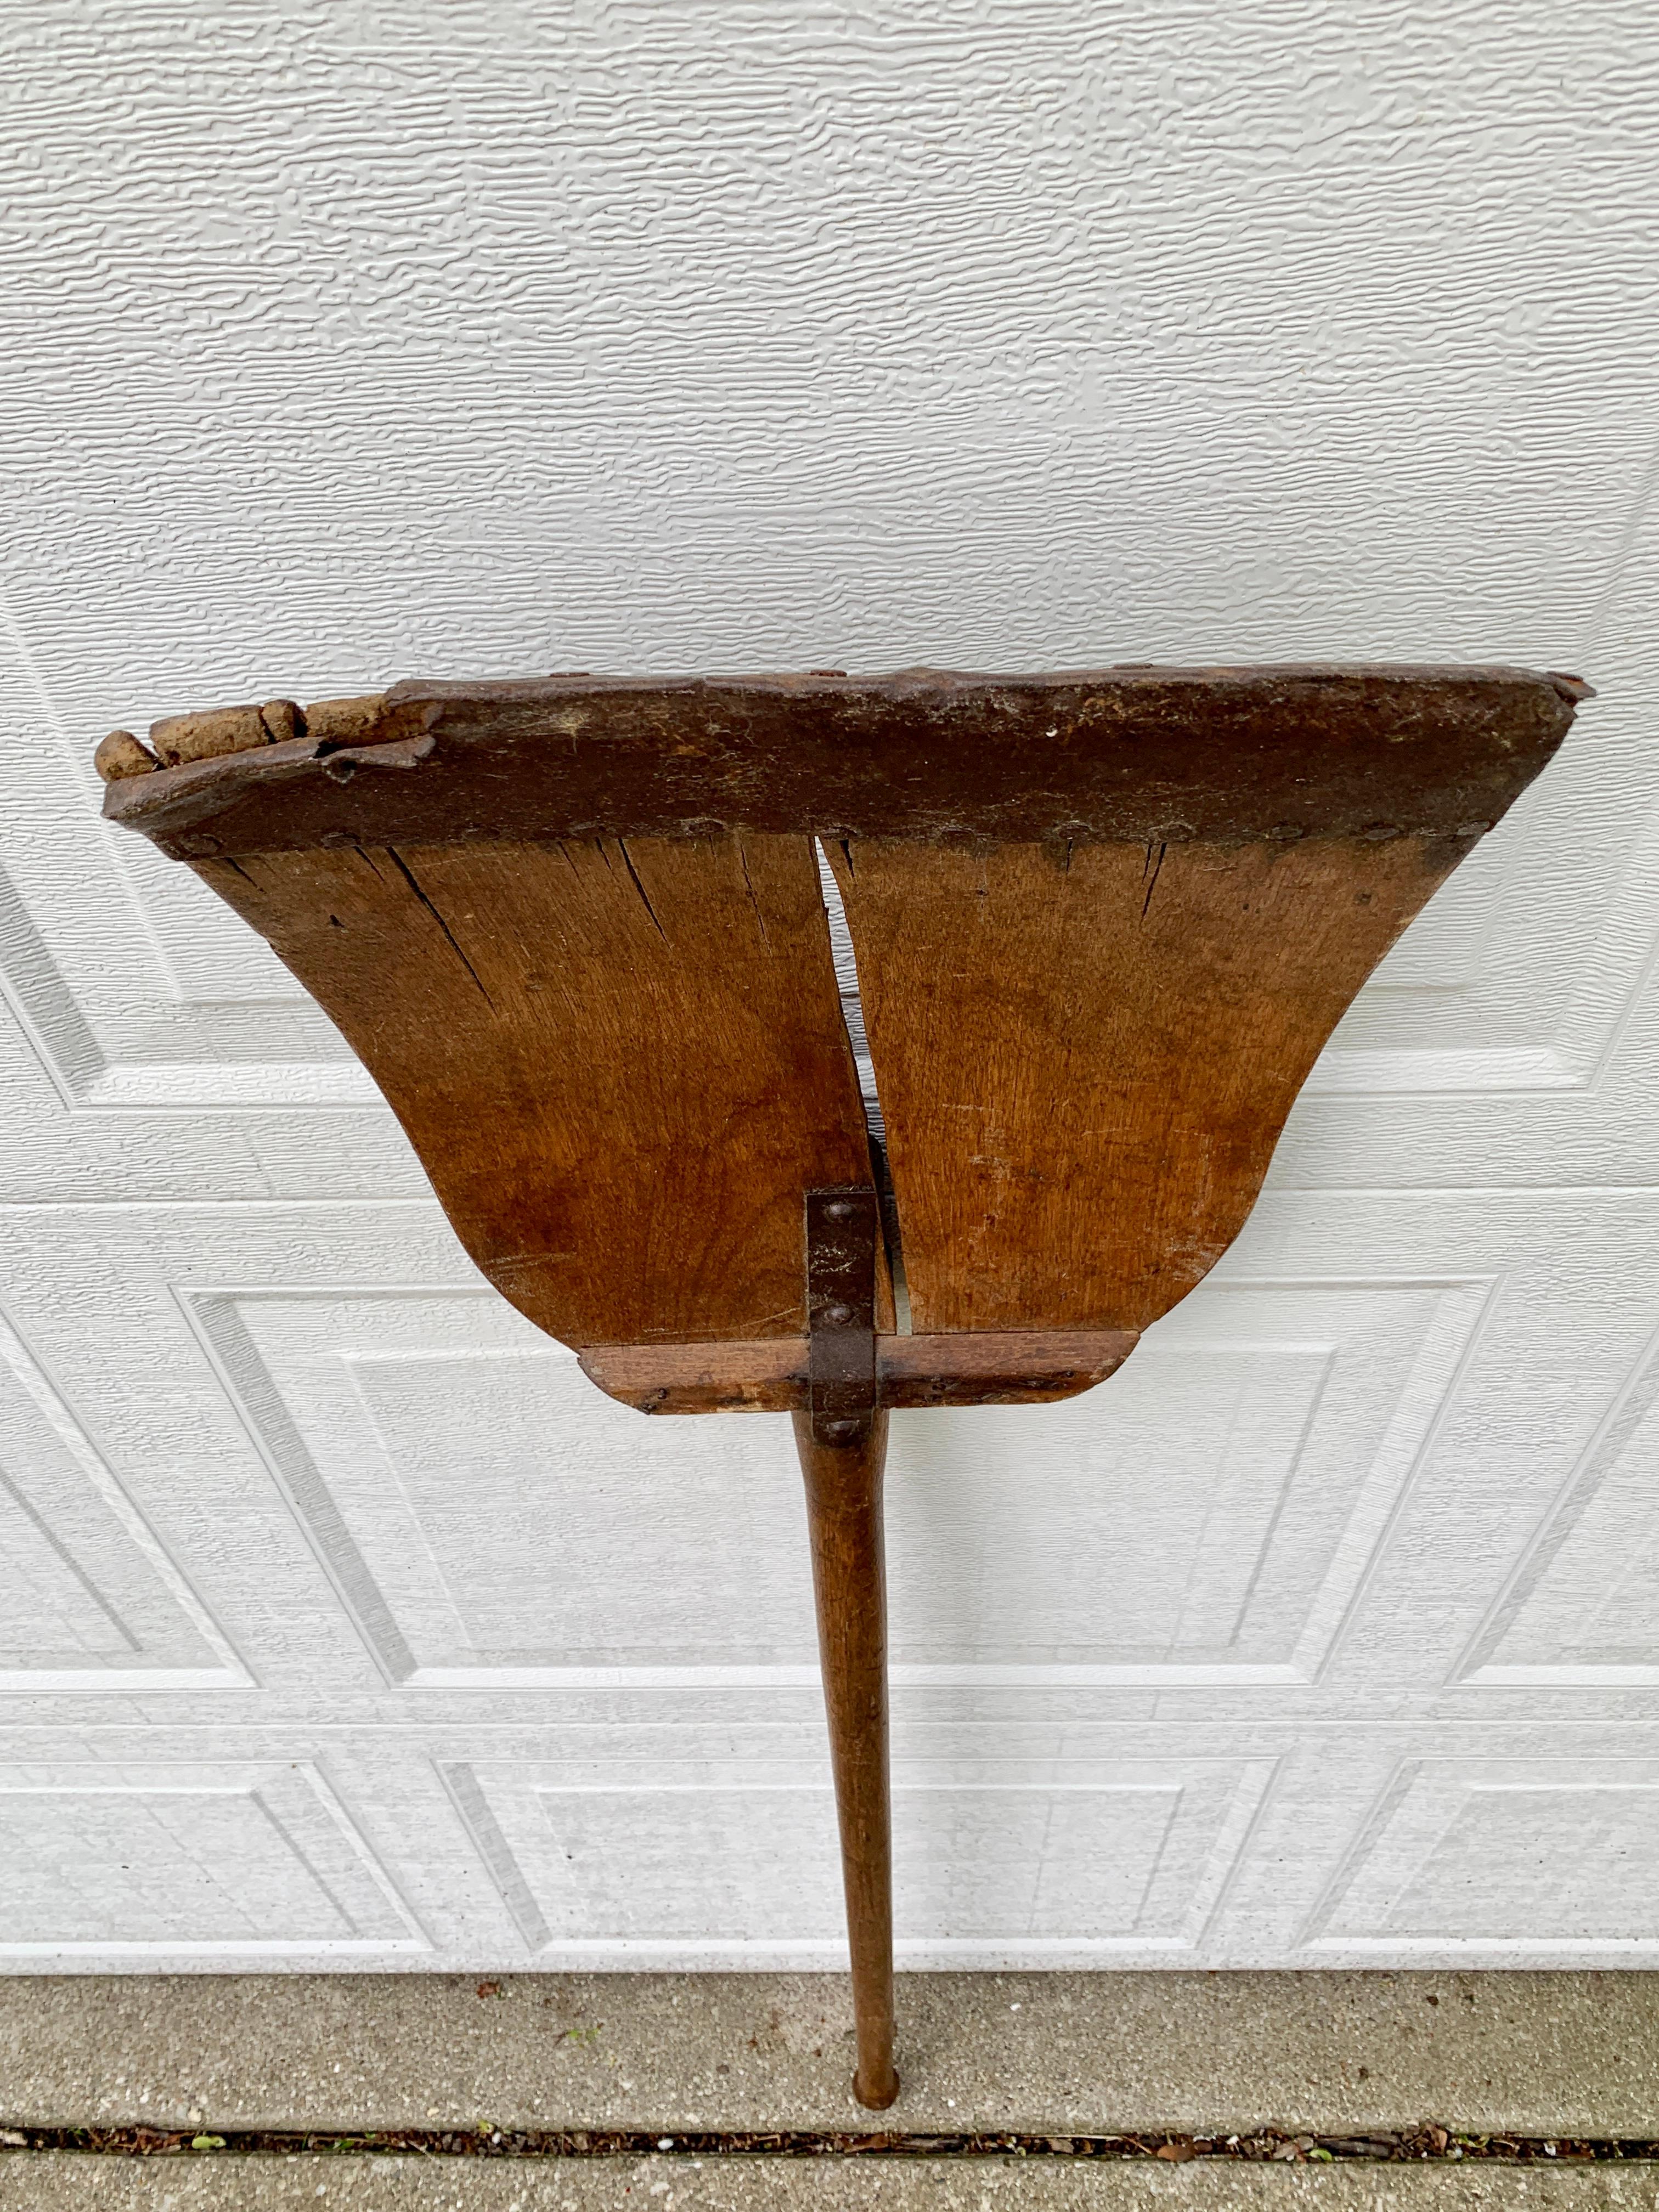 Rustic Antique 19th Century Hand Made Wooden Grain Shovel For Sale